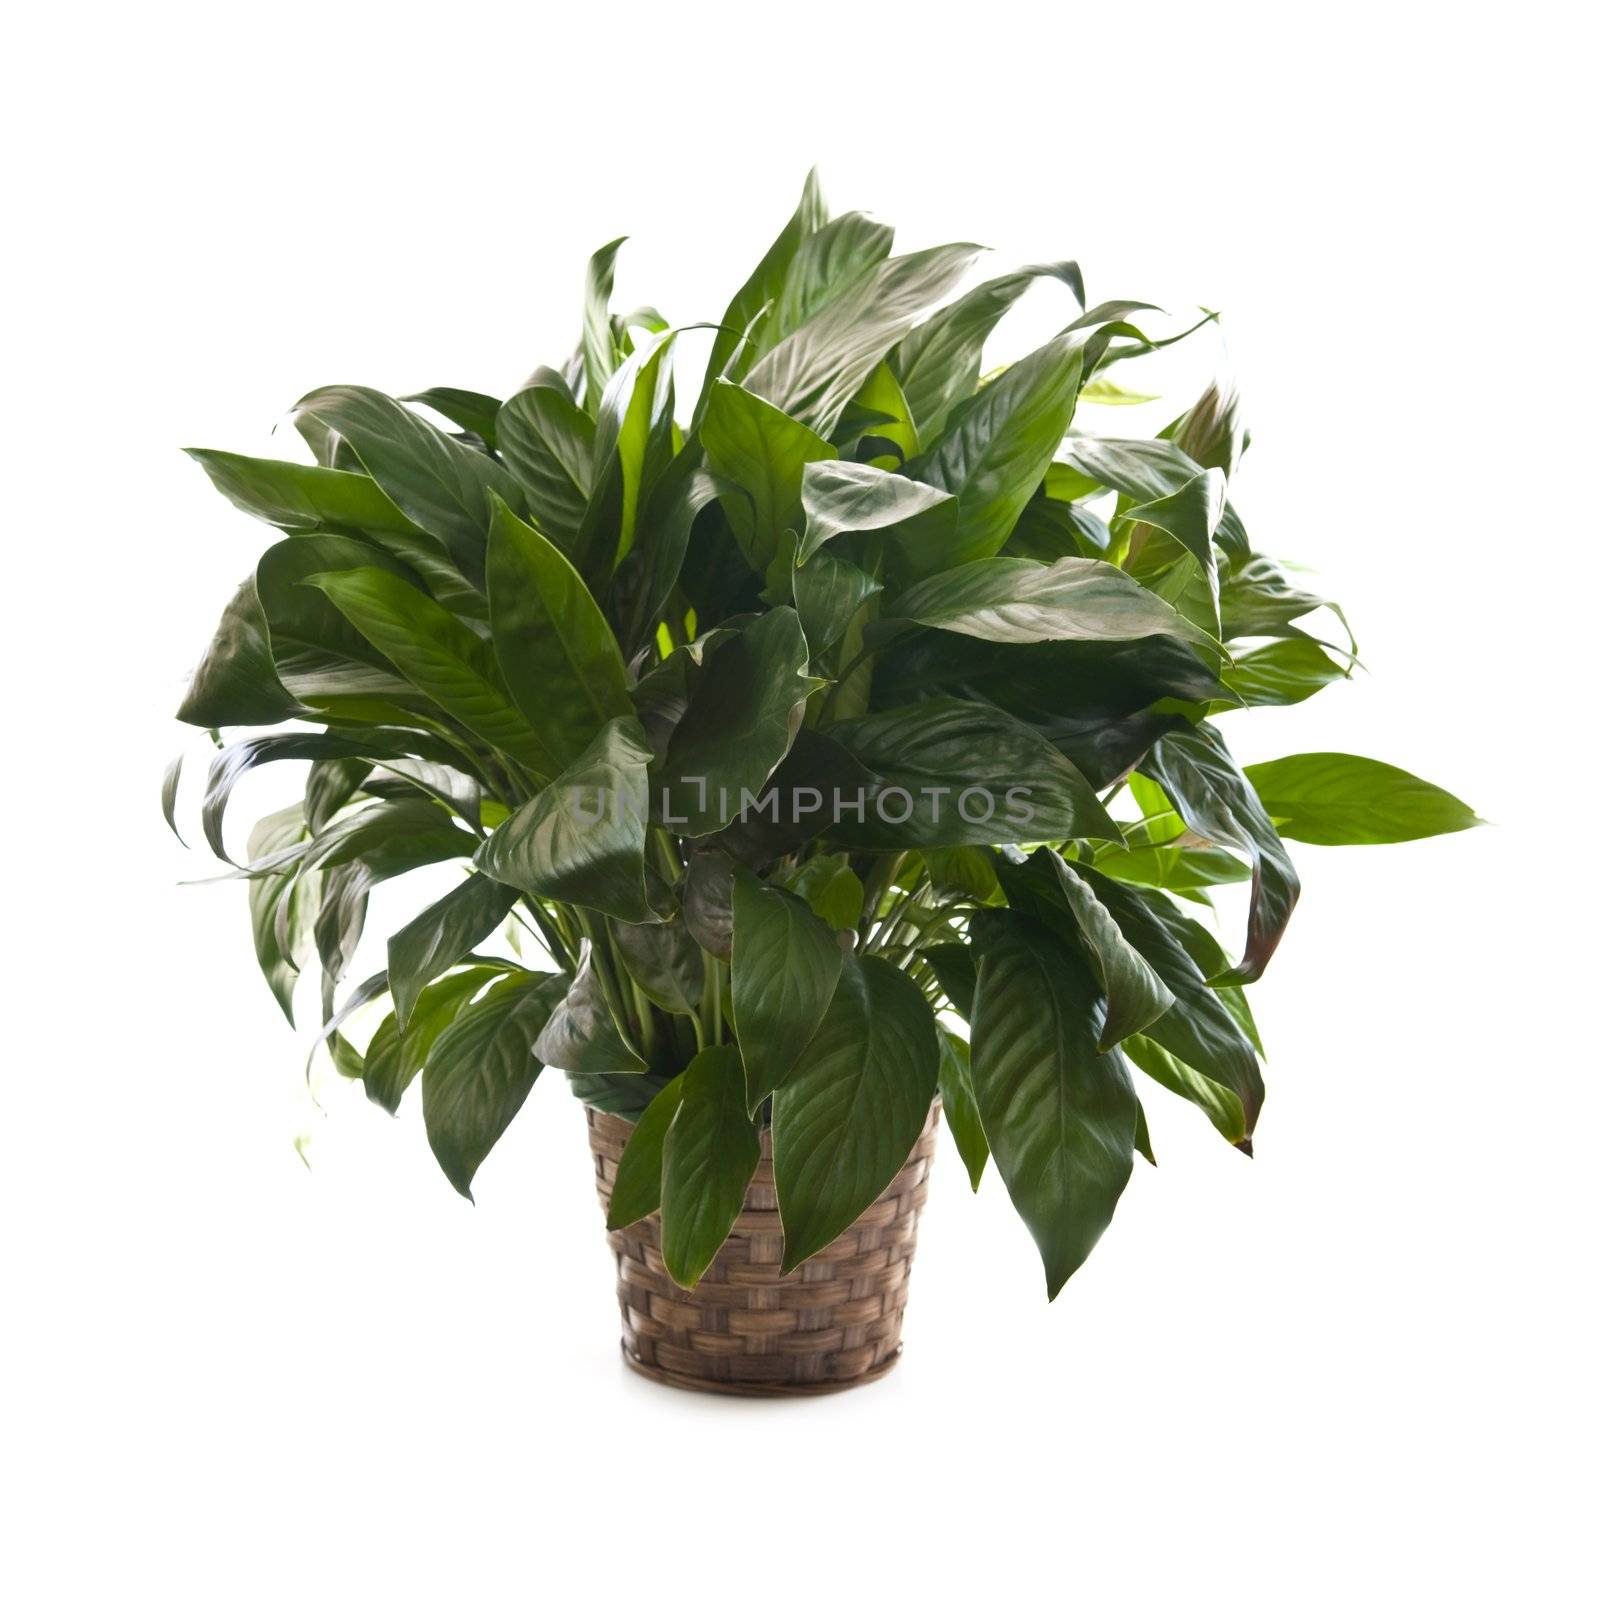 Green houseplant in basket isolated on white background